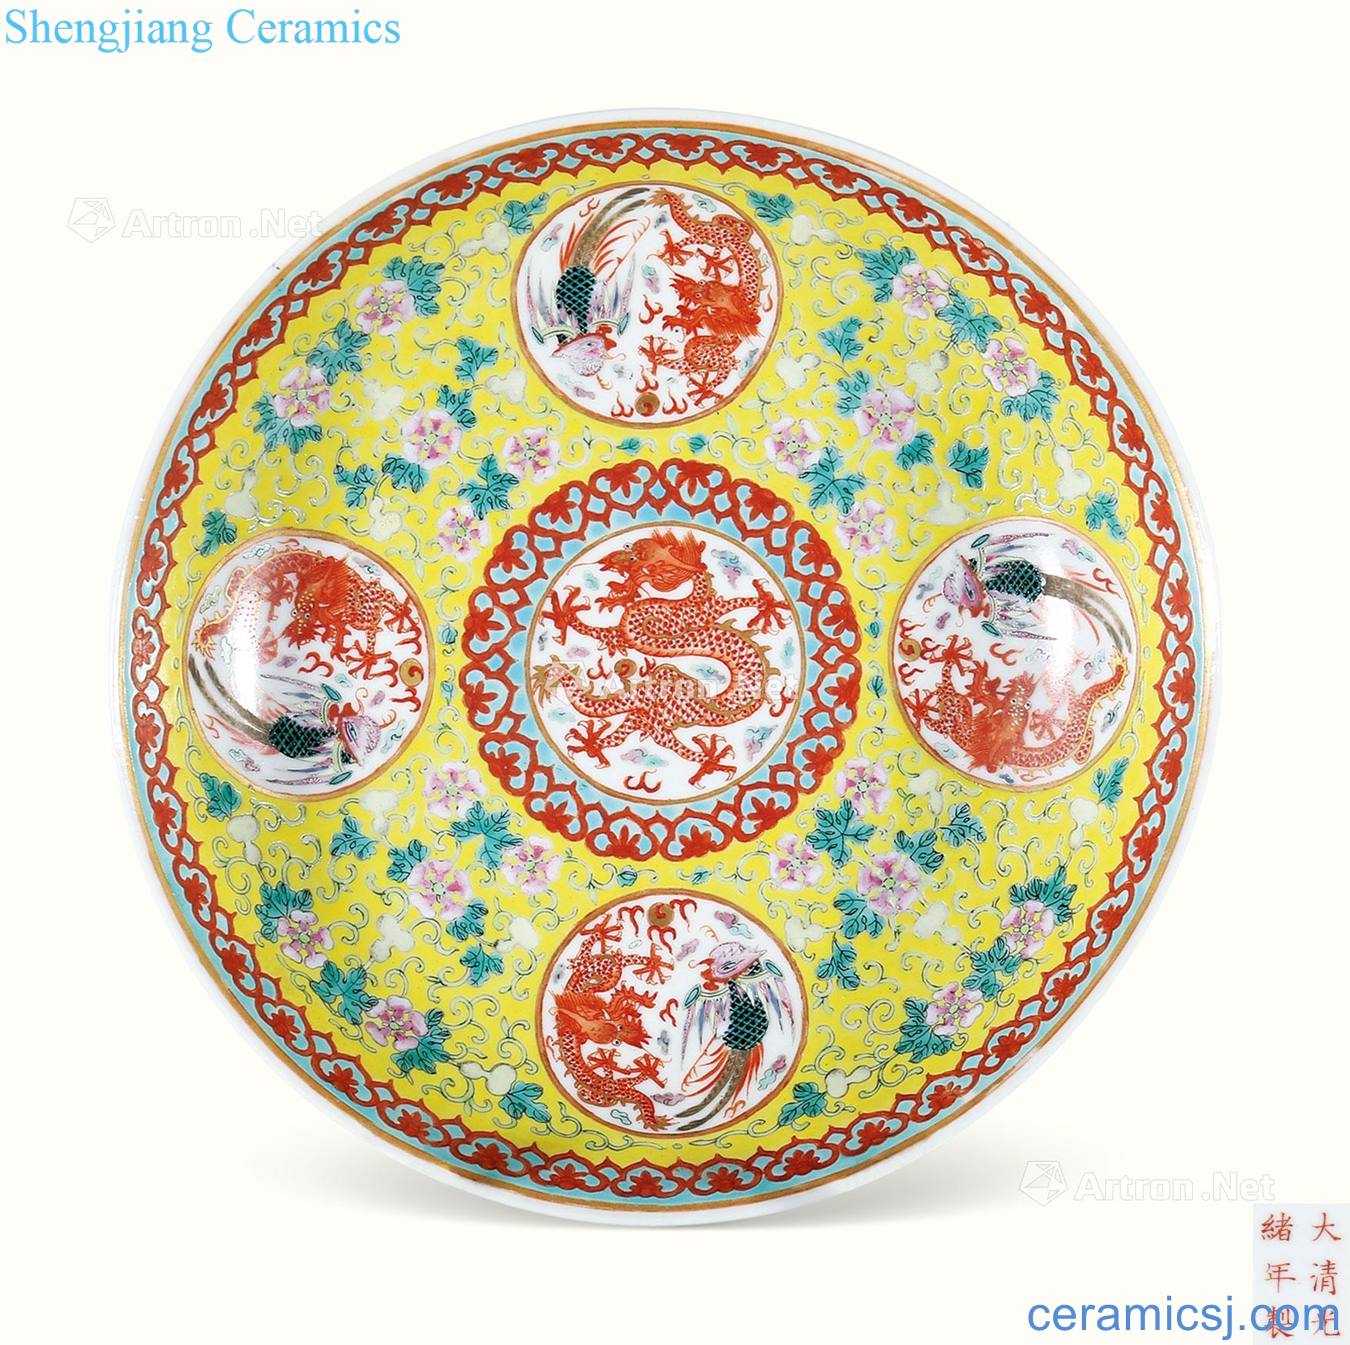 Pastel reign of qing emperor guangxu medallion longfeng tray